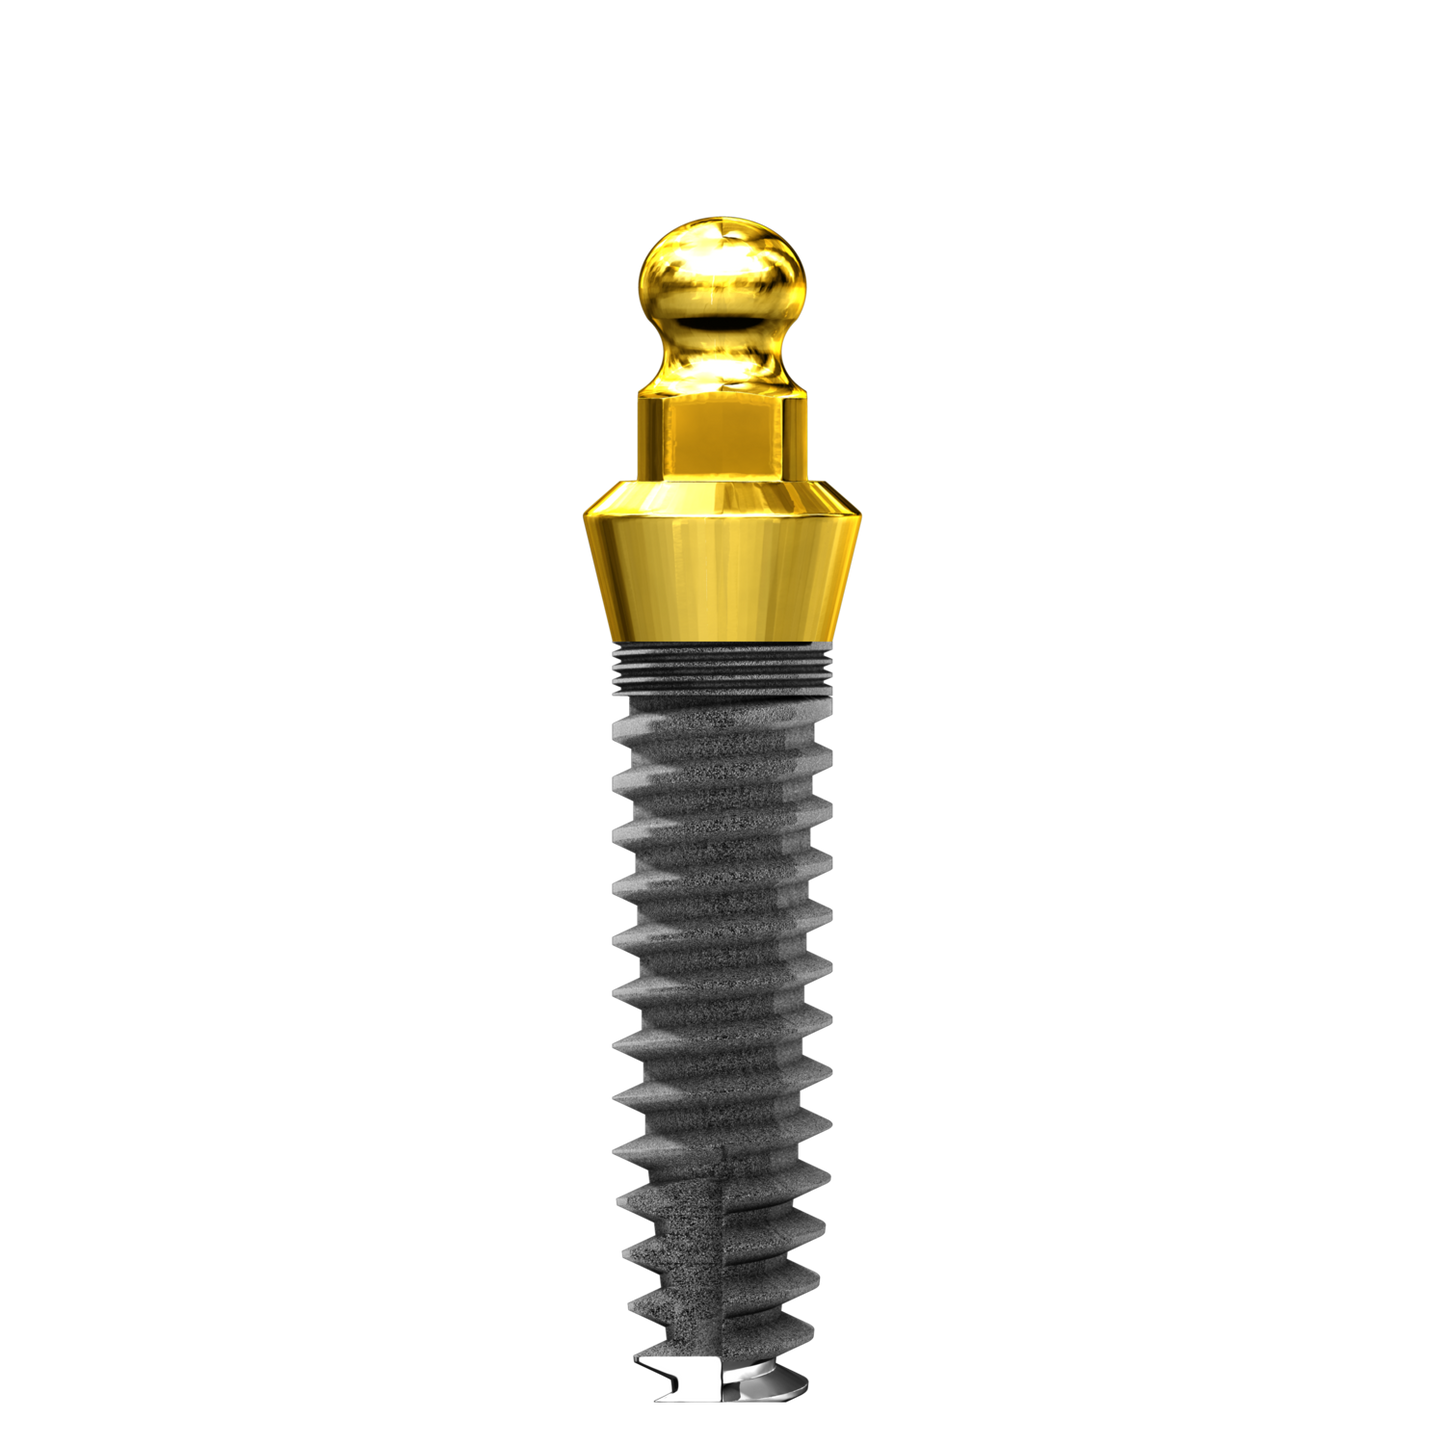 5.0mm x 14mm ISI C&B One Piece Implant